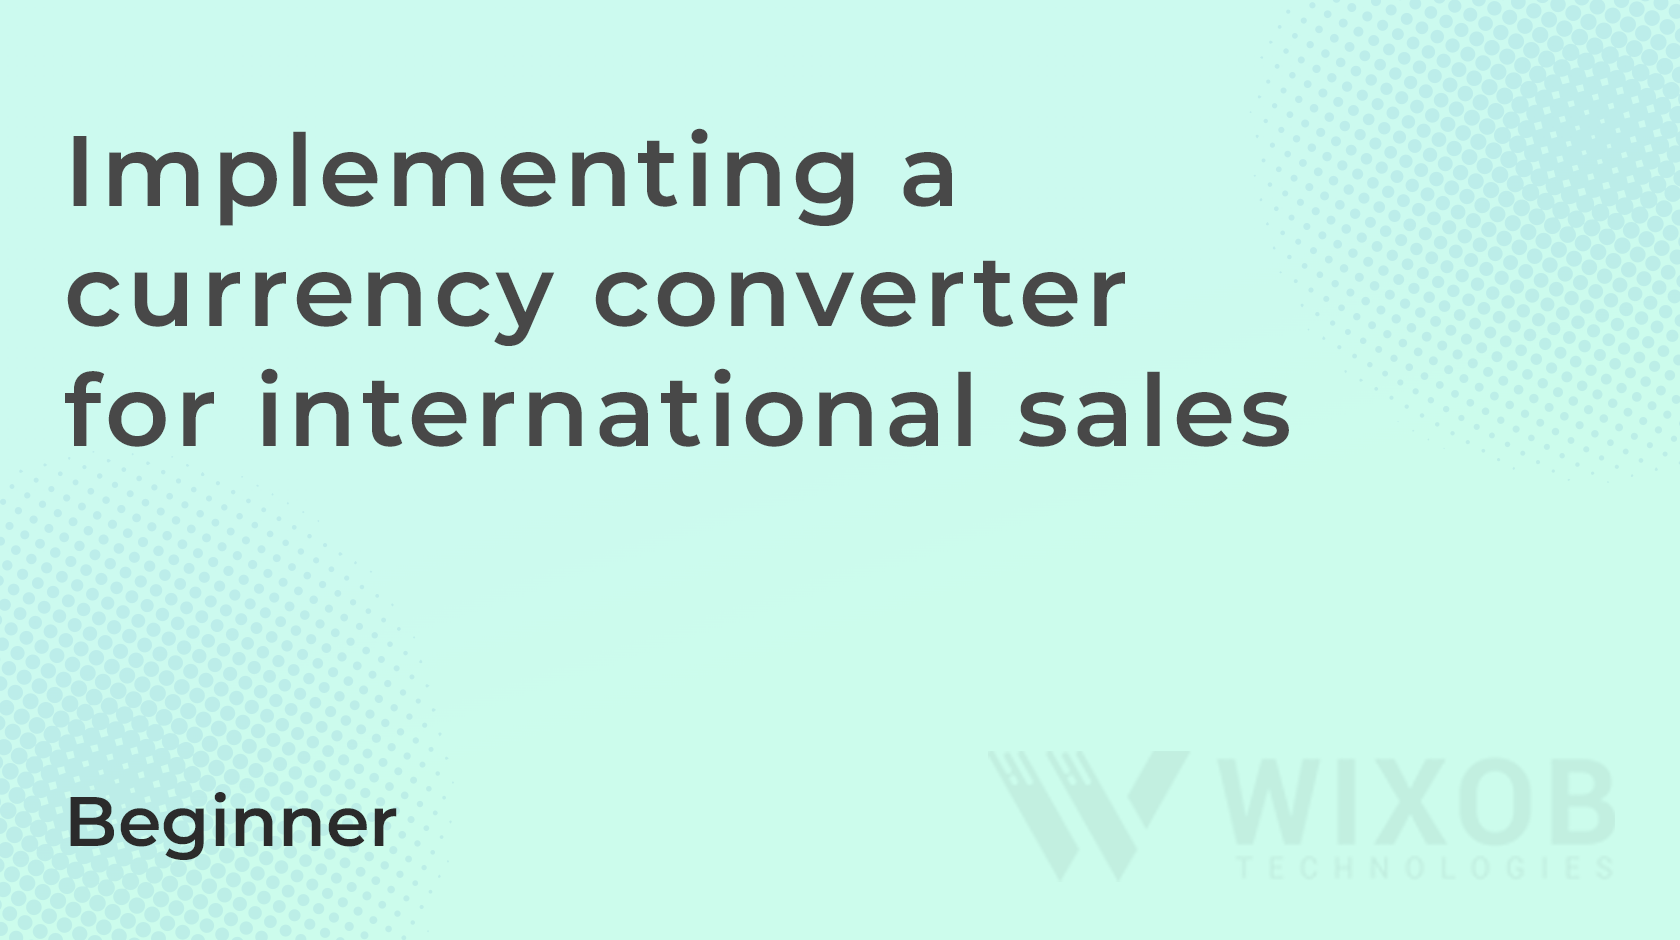 Implementing a currency converter for international sales